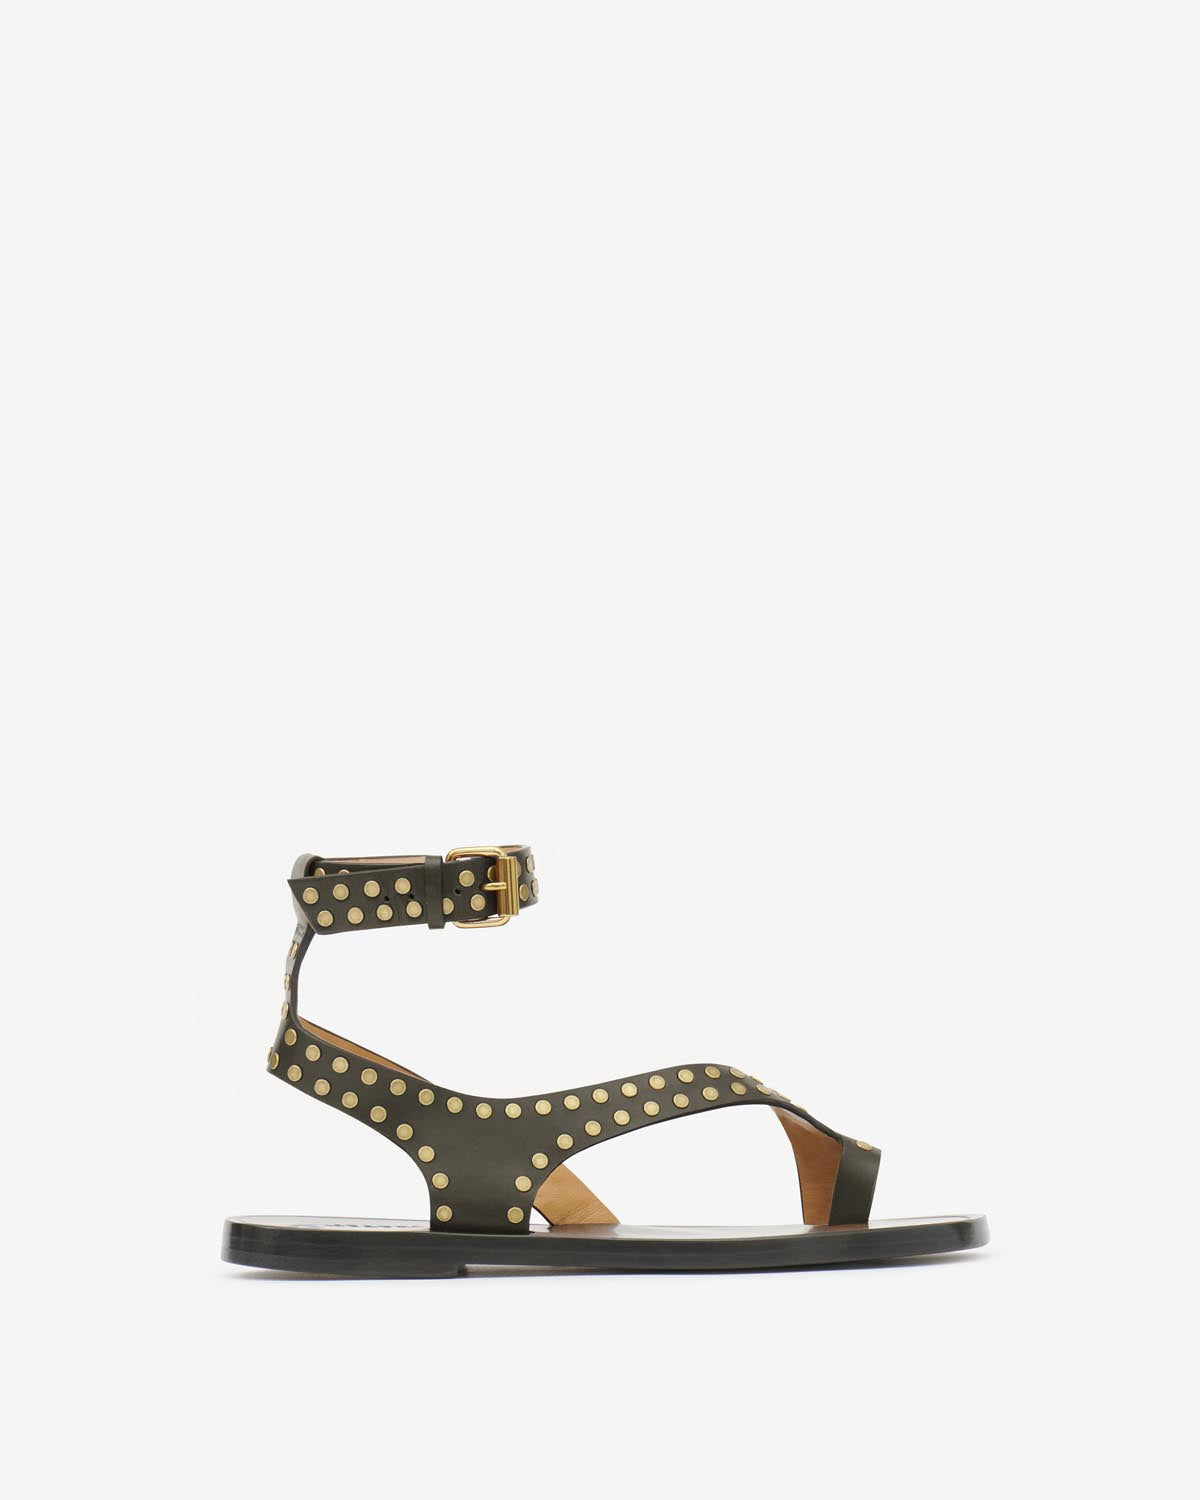 Jiona sandals Woman Black and gold 1